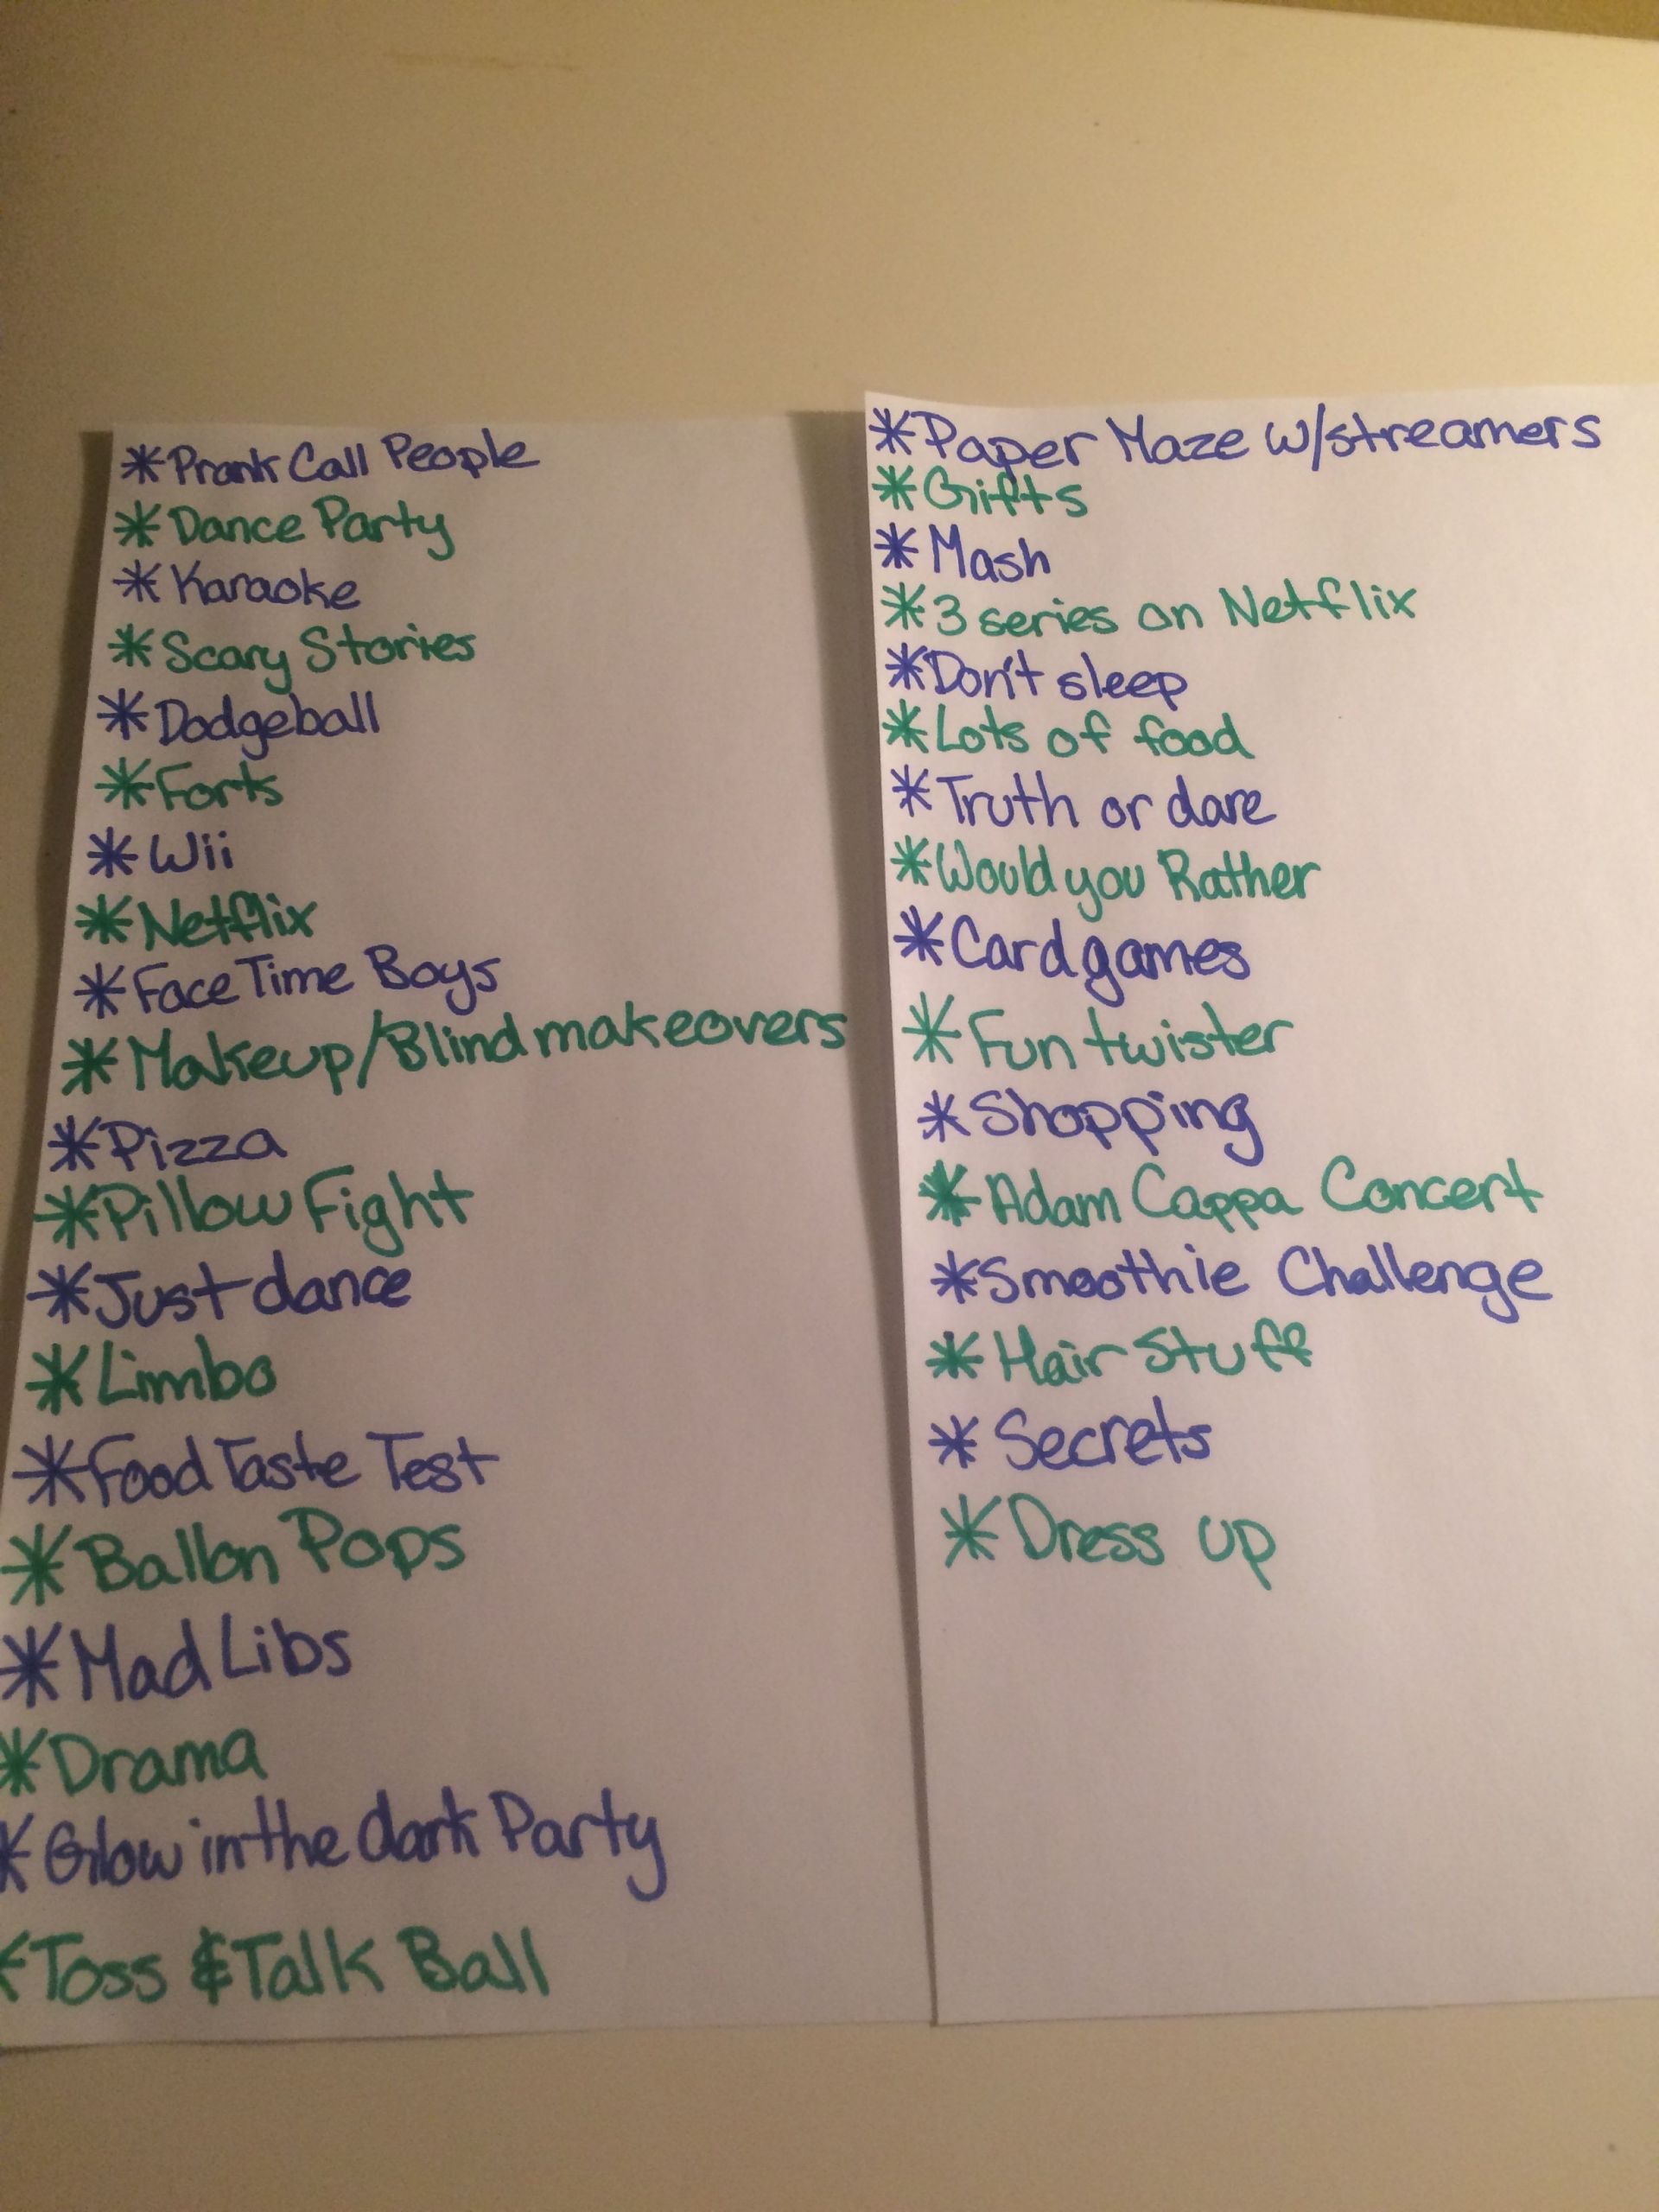 Fun Things To Do For A Birthday Party
 Things to do at a girls sleepover